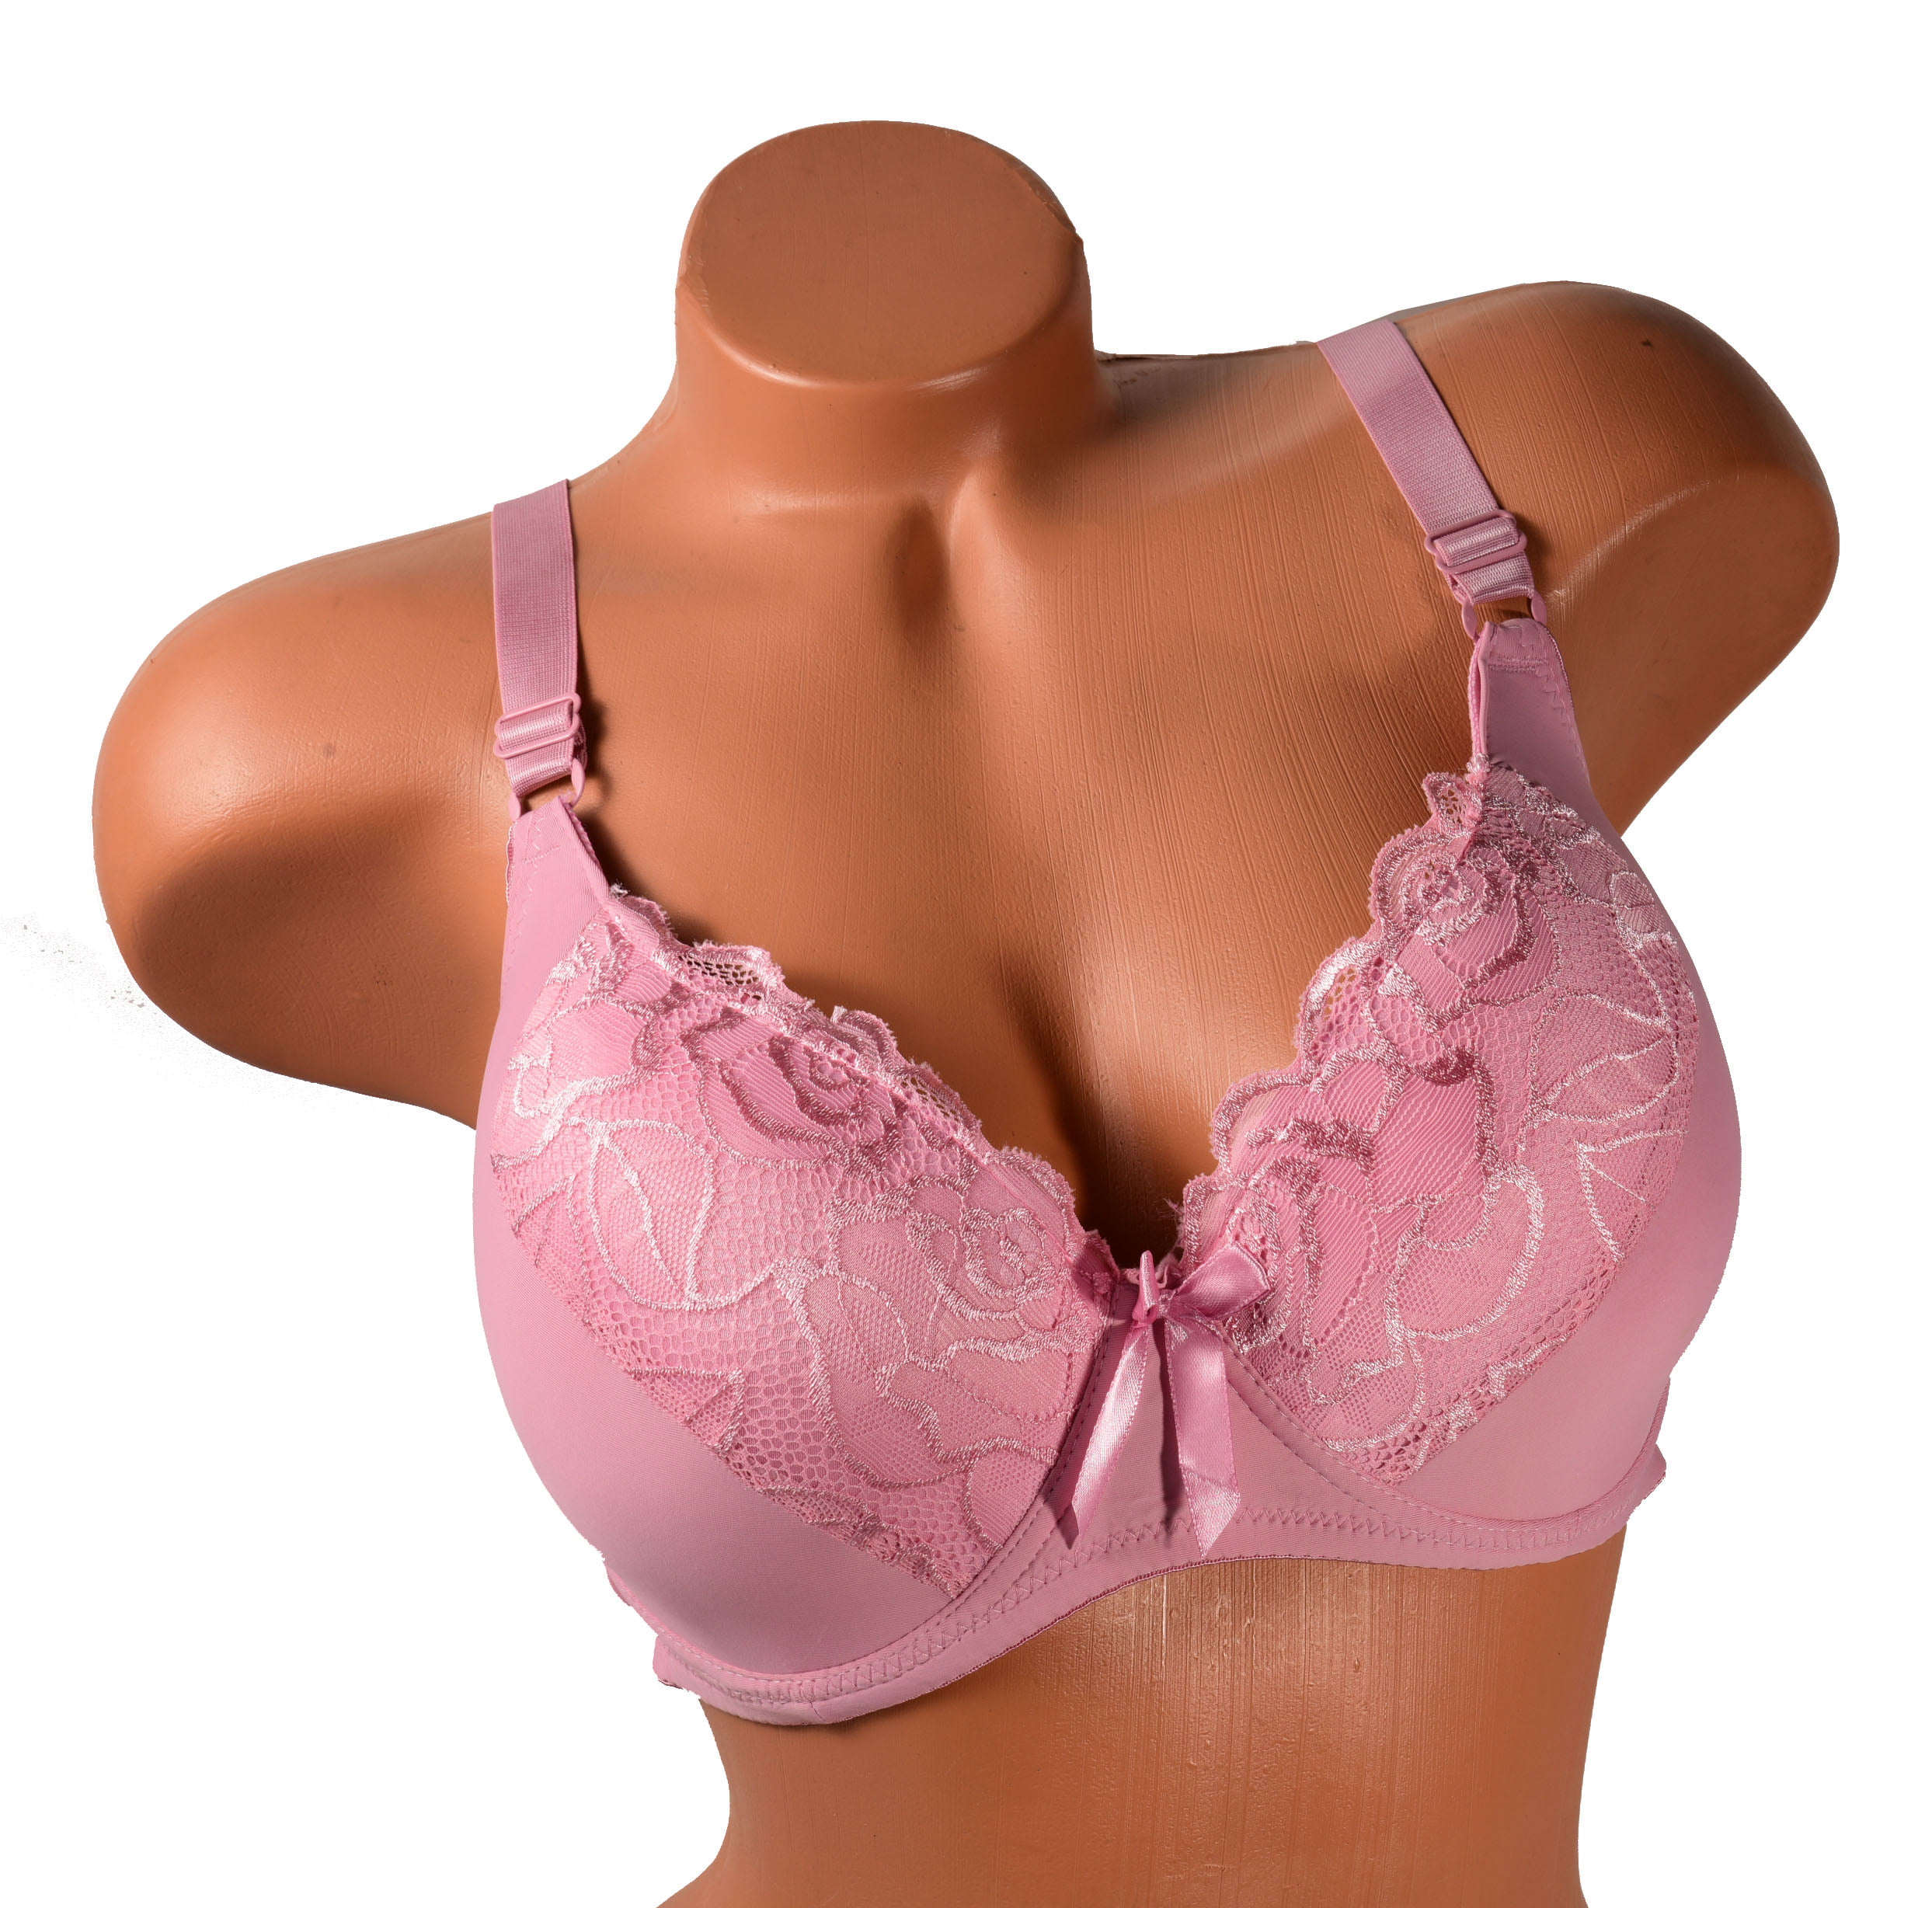 Women Bras 6 Pack of Bra D cup DD cup DDD cup Size 42D (8214)